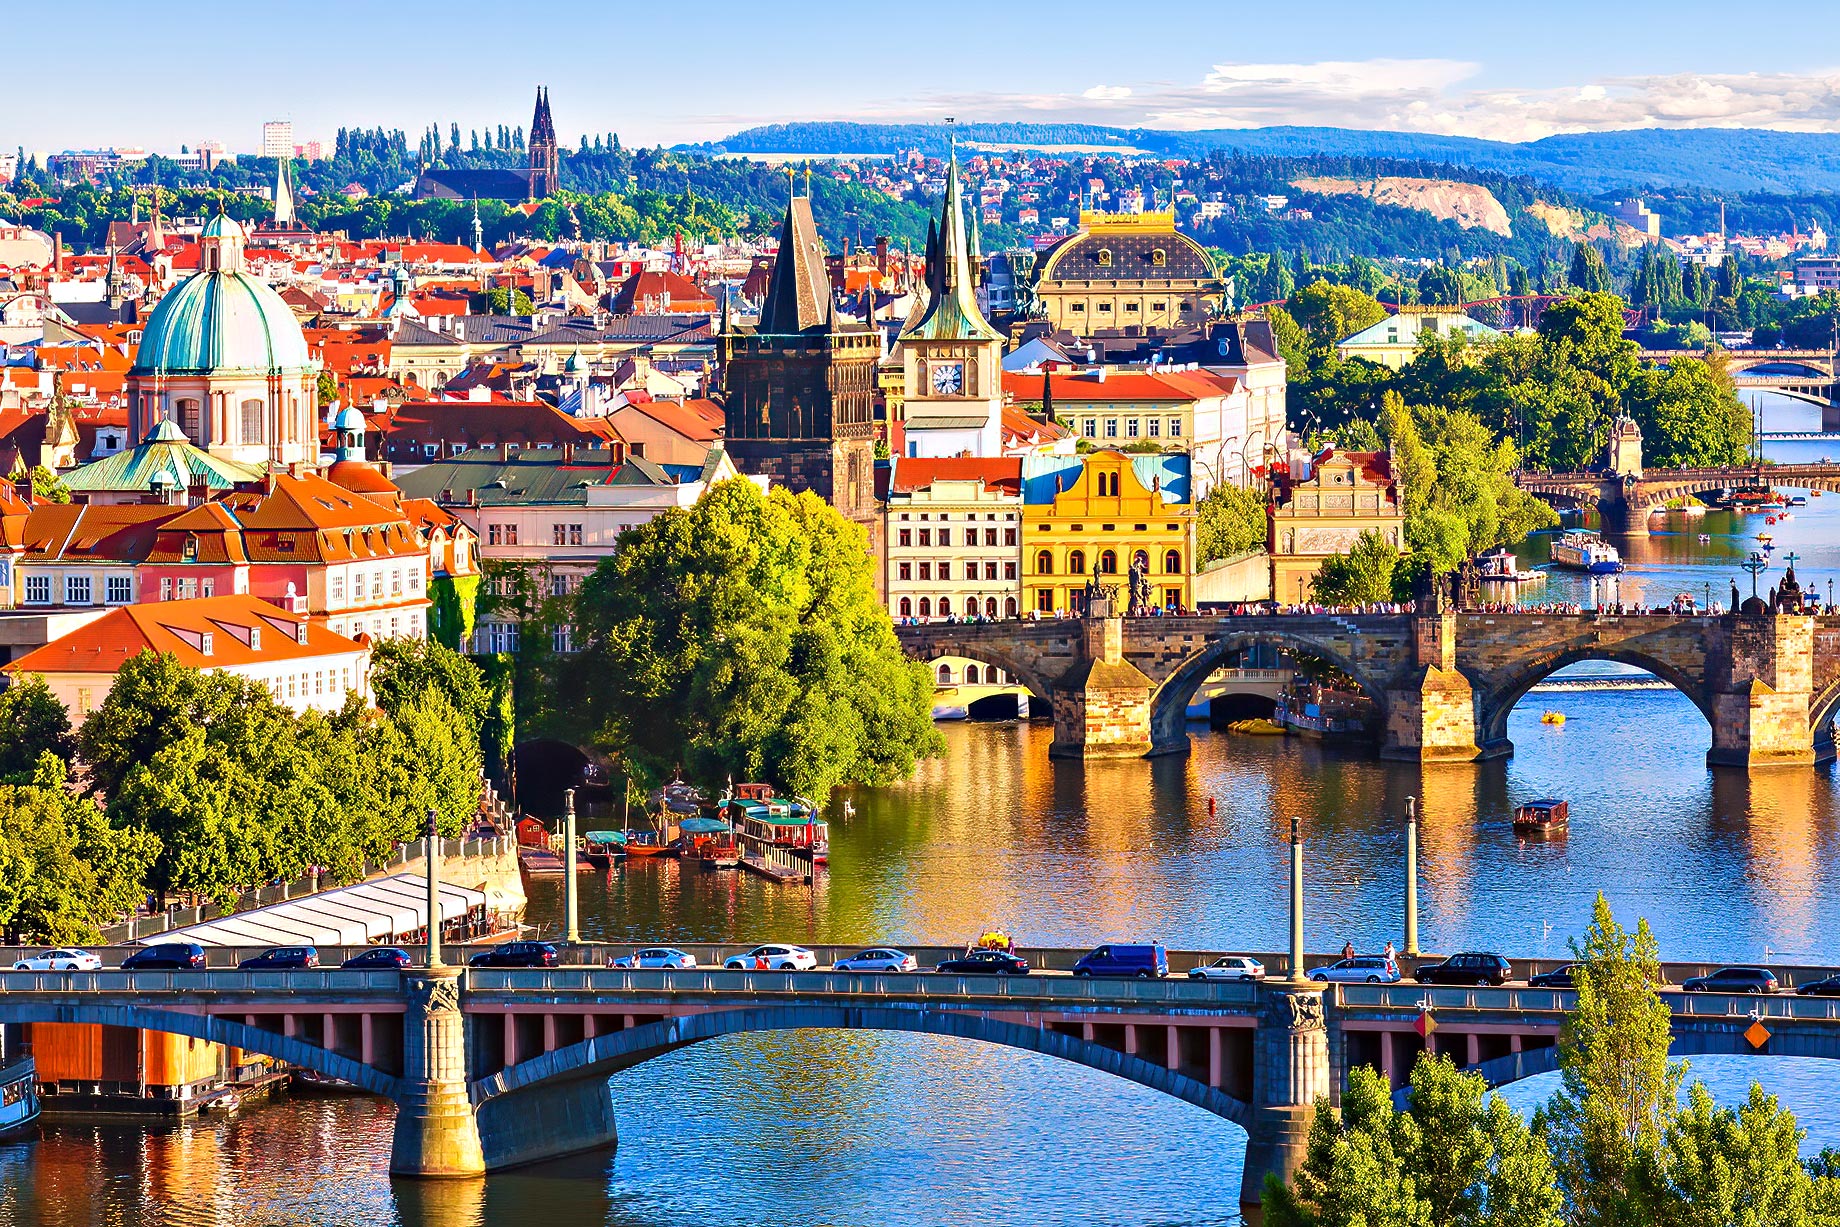 Prague, Czechia: A Blend of Heritage, Culture, and Scenic Beauty